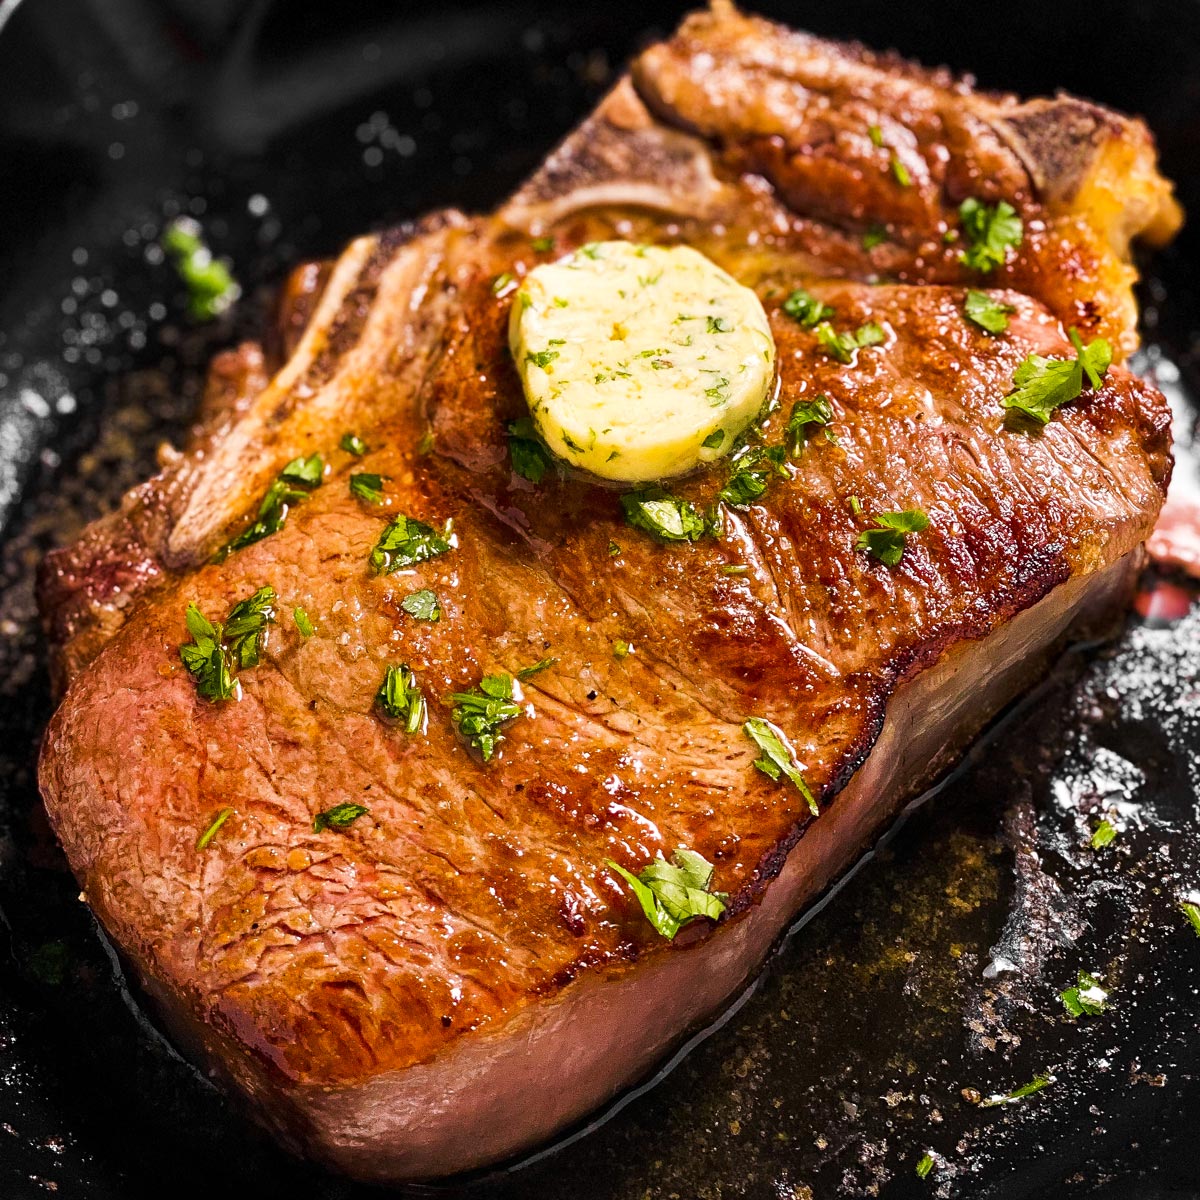 The Secret to Better Steak? Cook It Like the French Do., Recipe